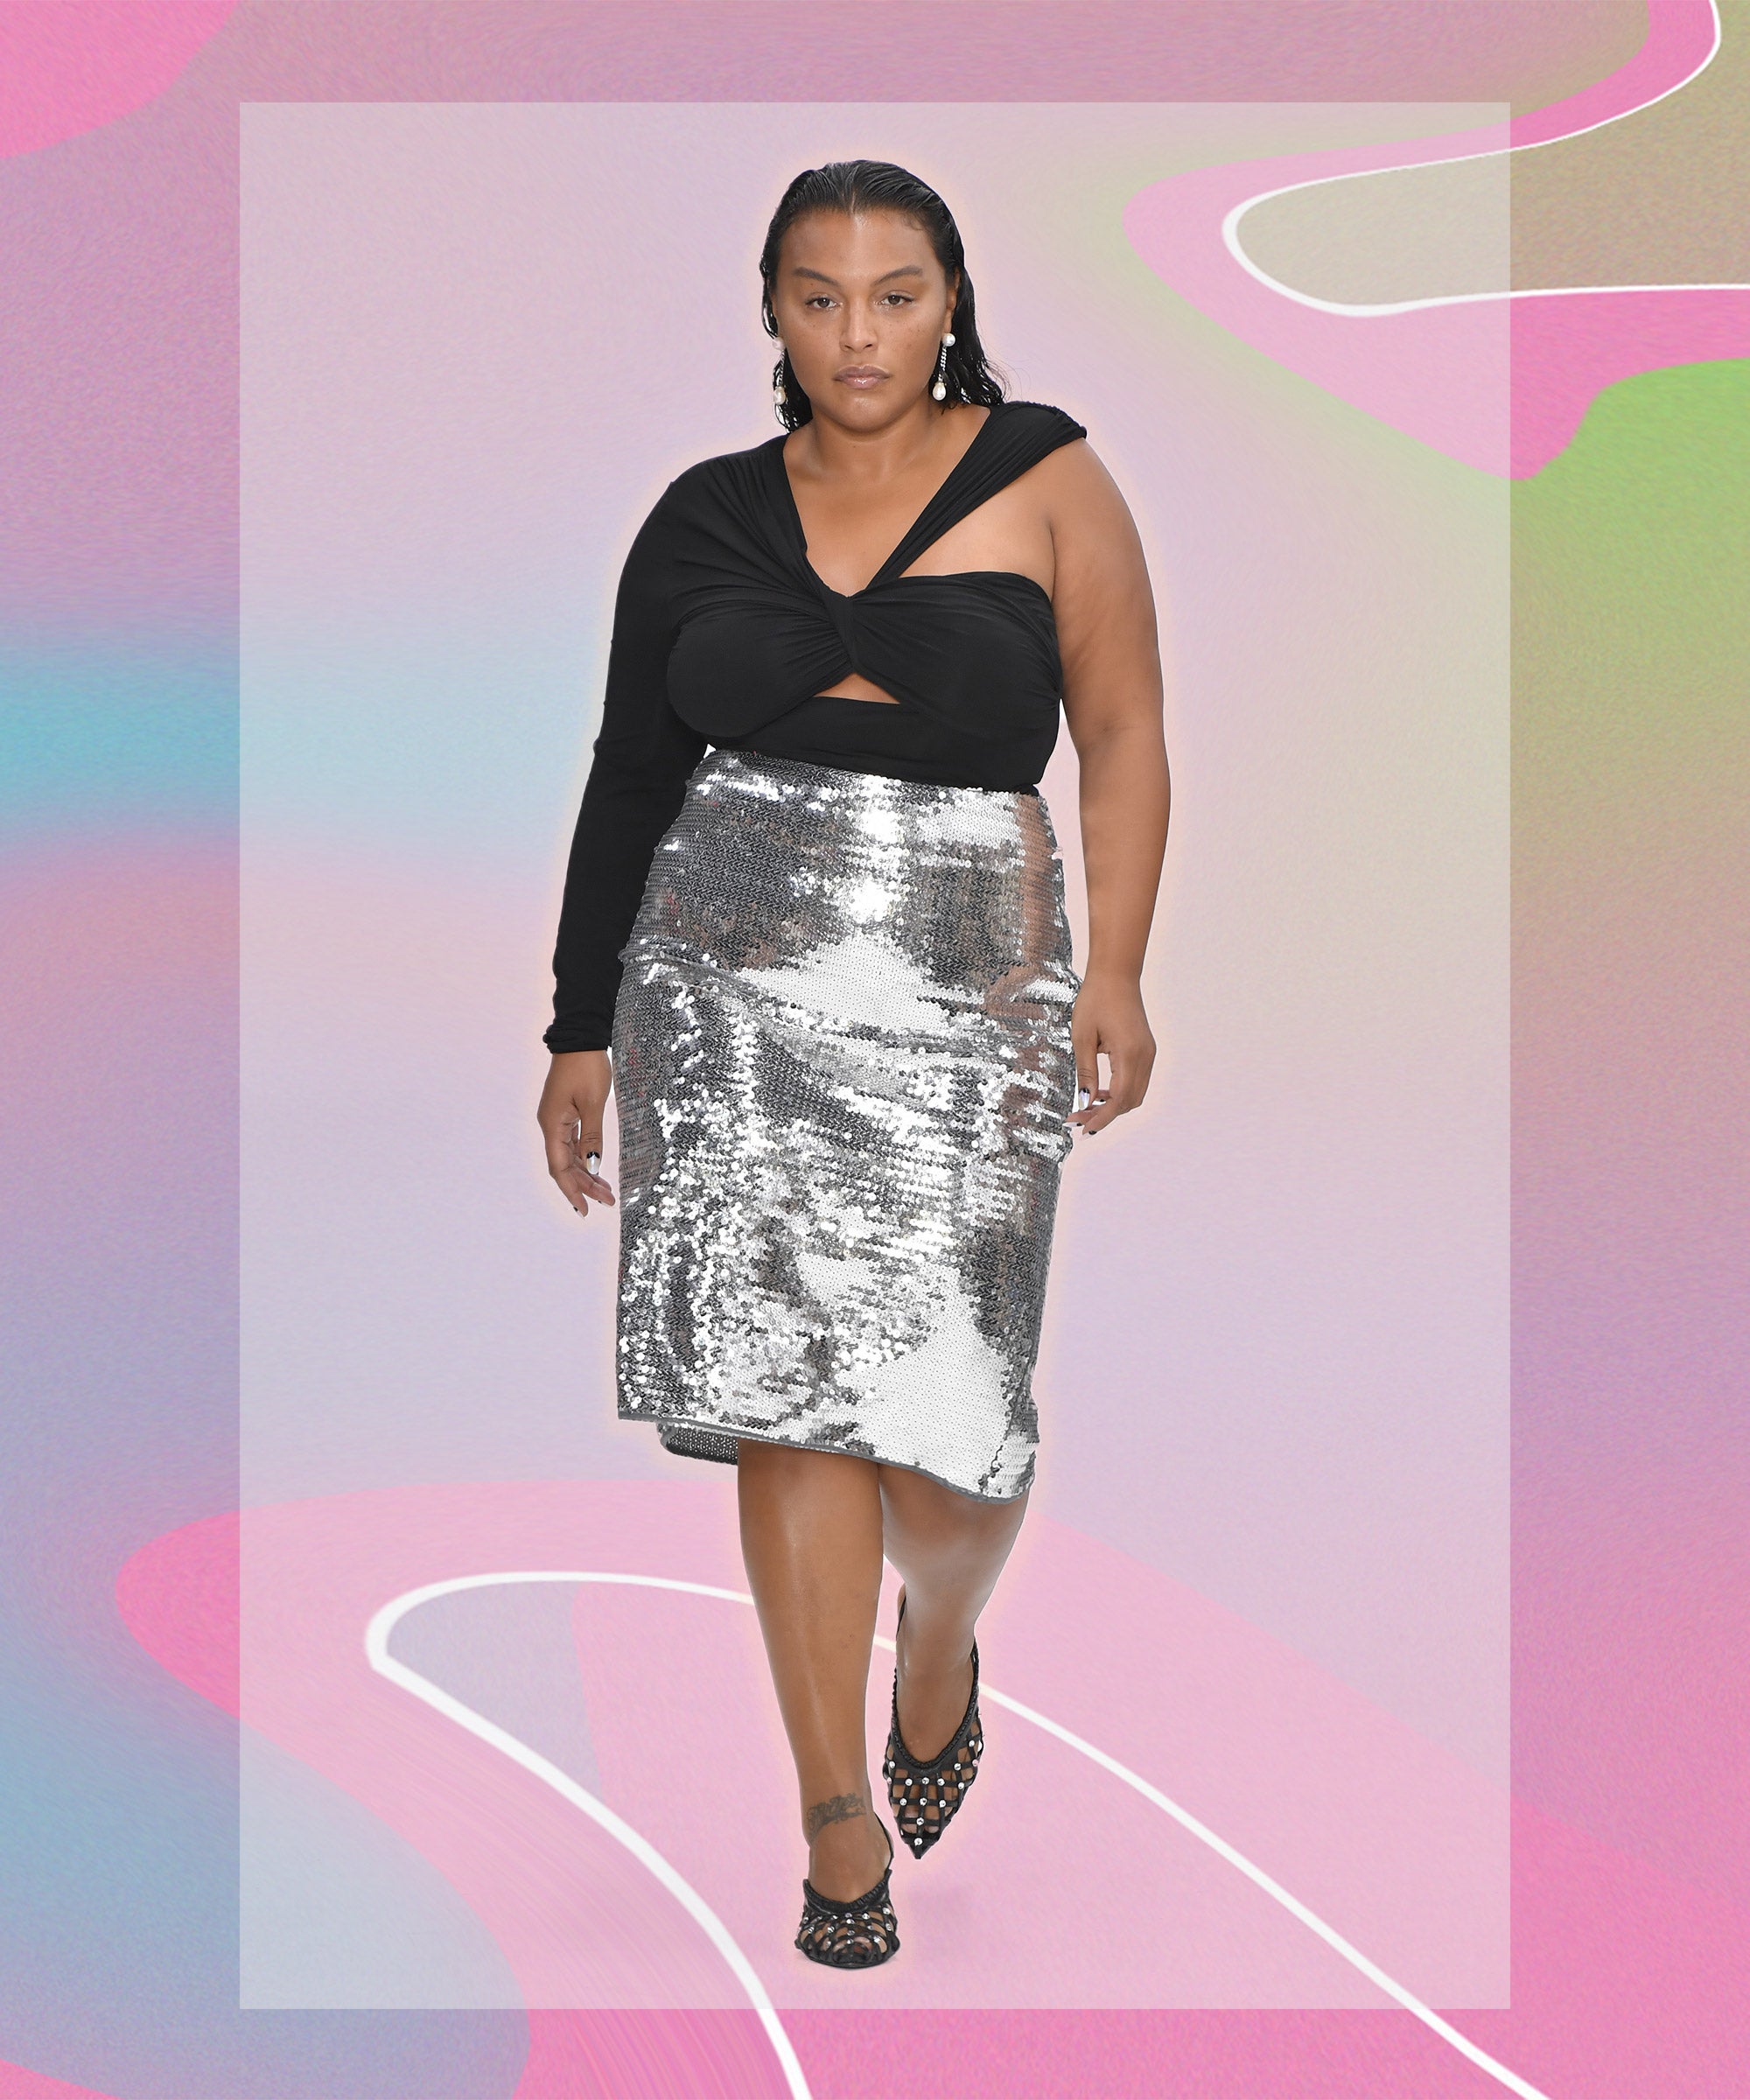 Skirt Trends 2022 5 Styles You Need In Your Summer Wardrobe  StyleCaster